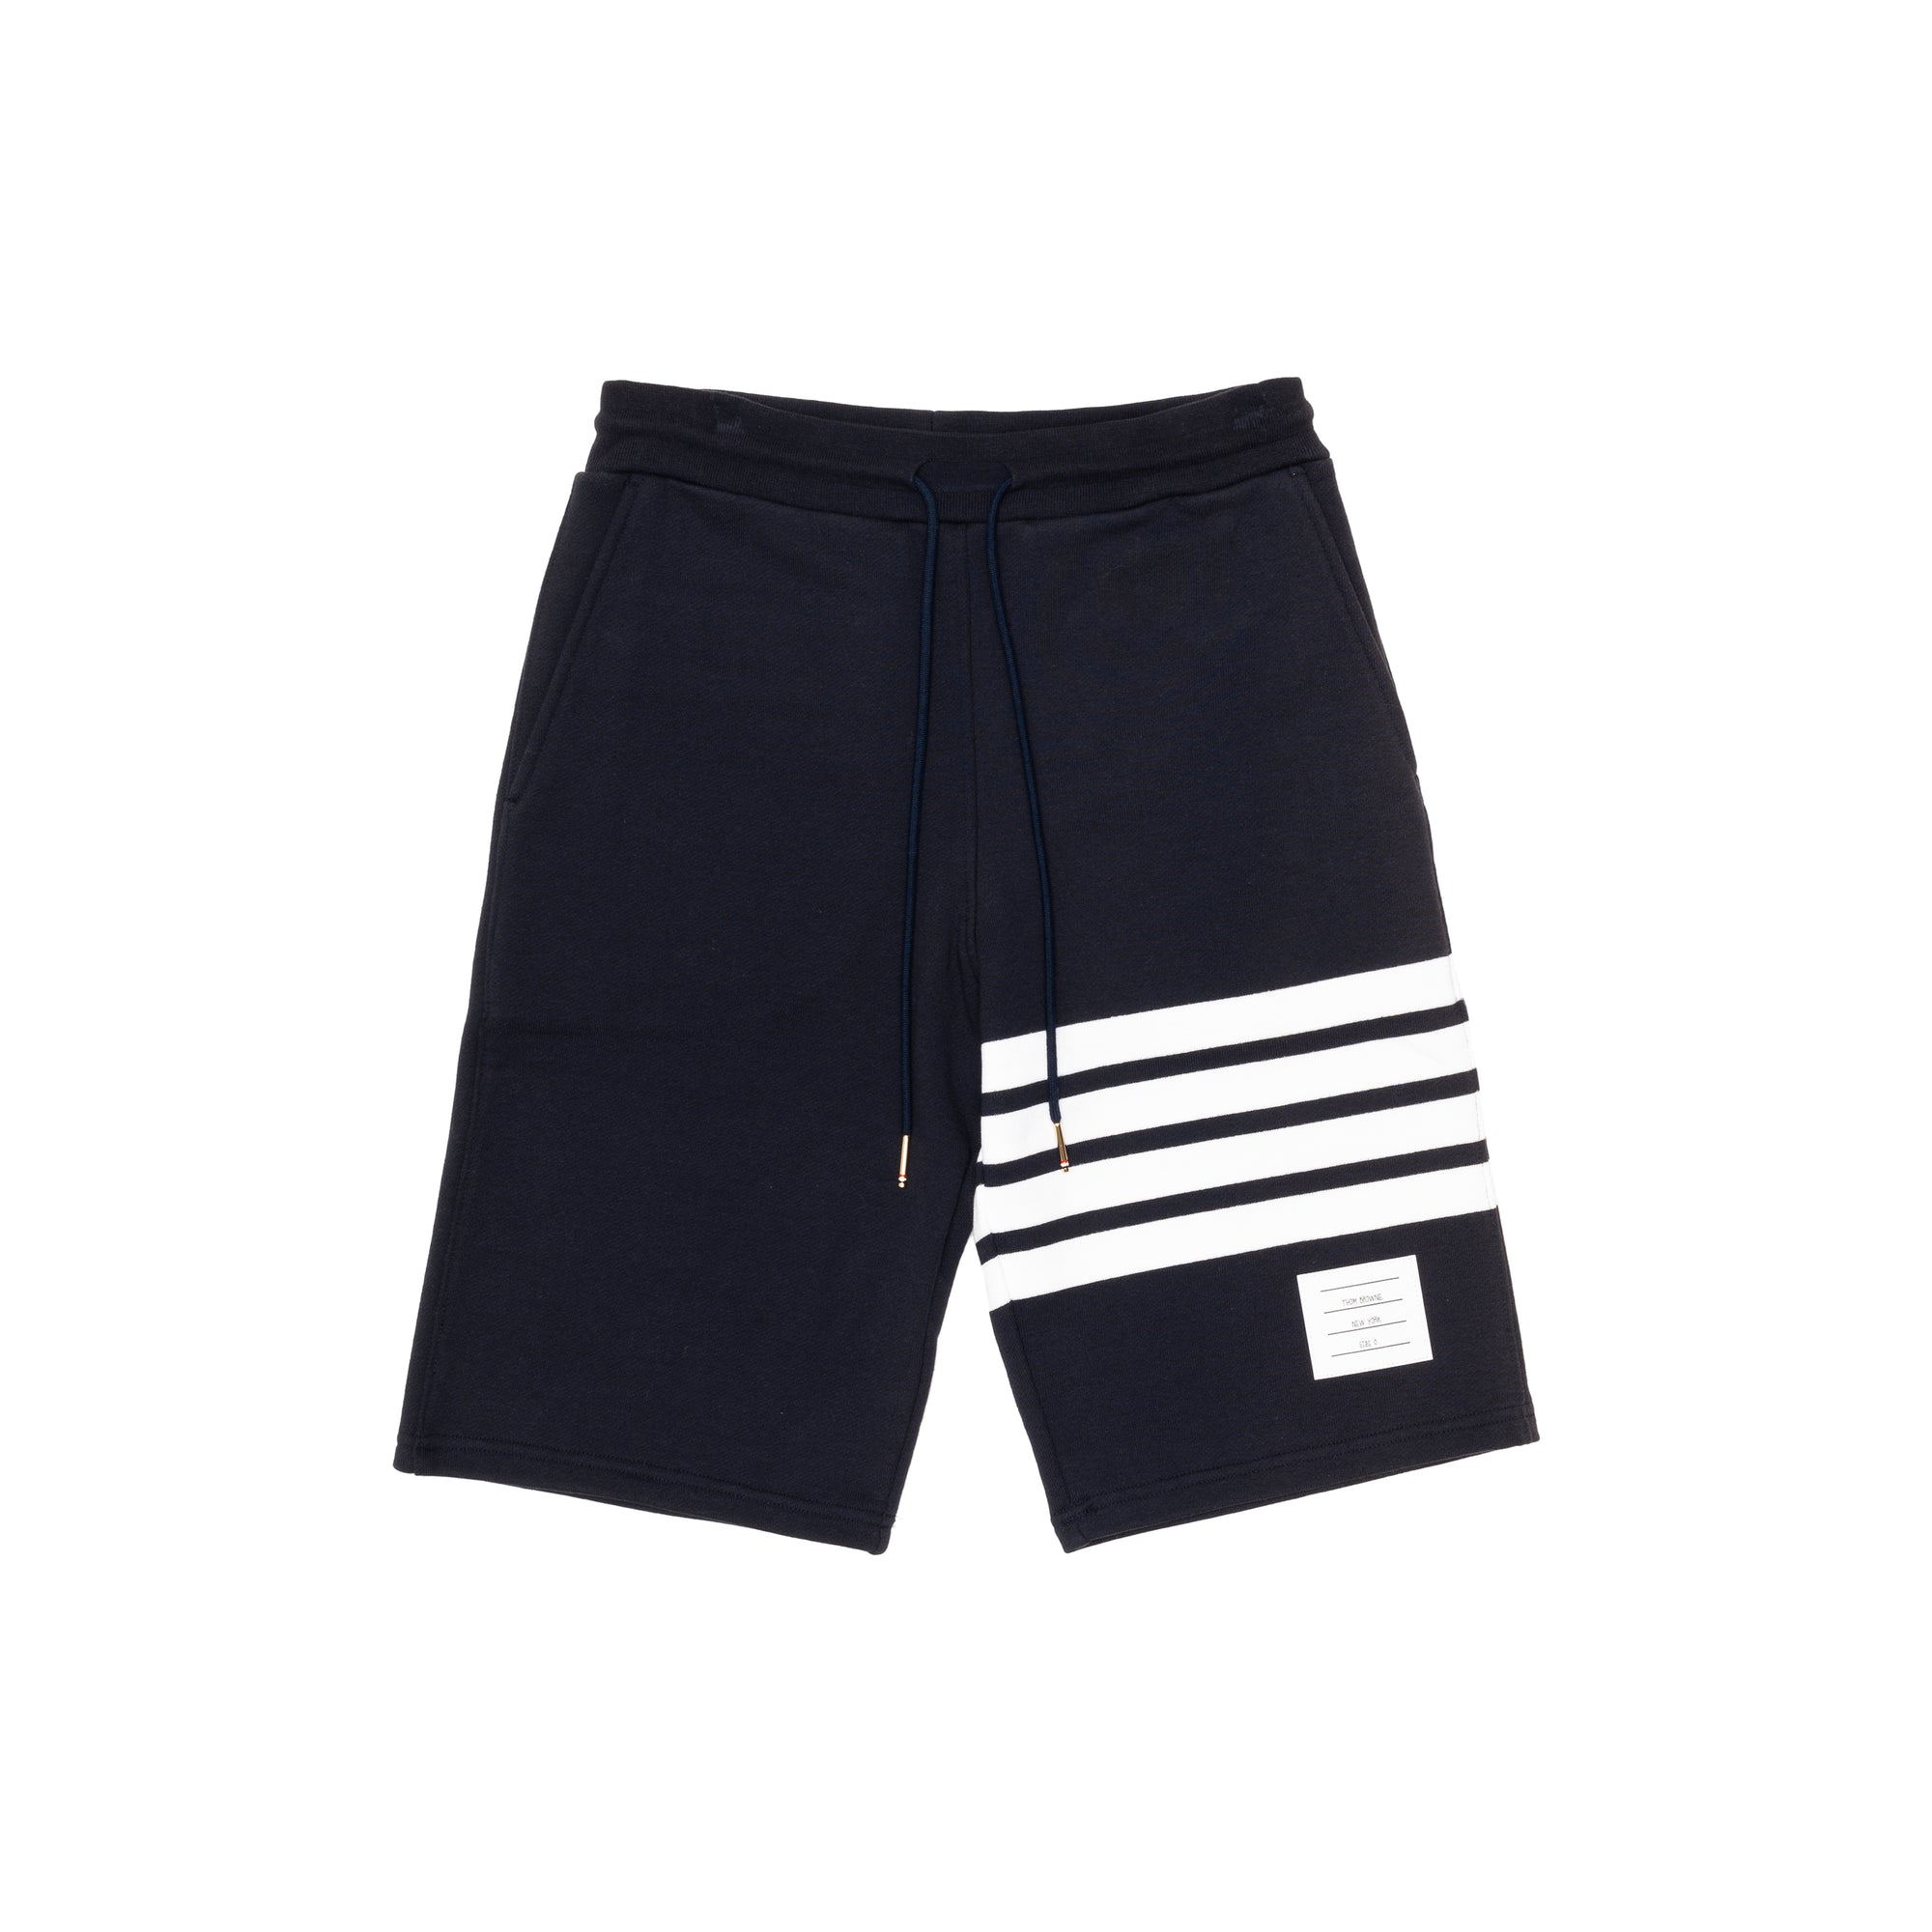 THOM BROWNE - MENS CLASSIC SWEAT SHORTS WITH ENGI - NAVY - (MJQ012H-00535) view 1